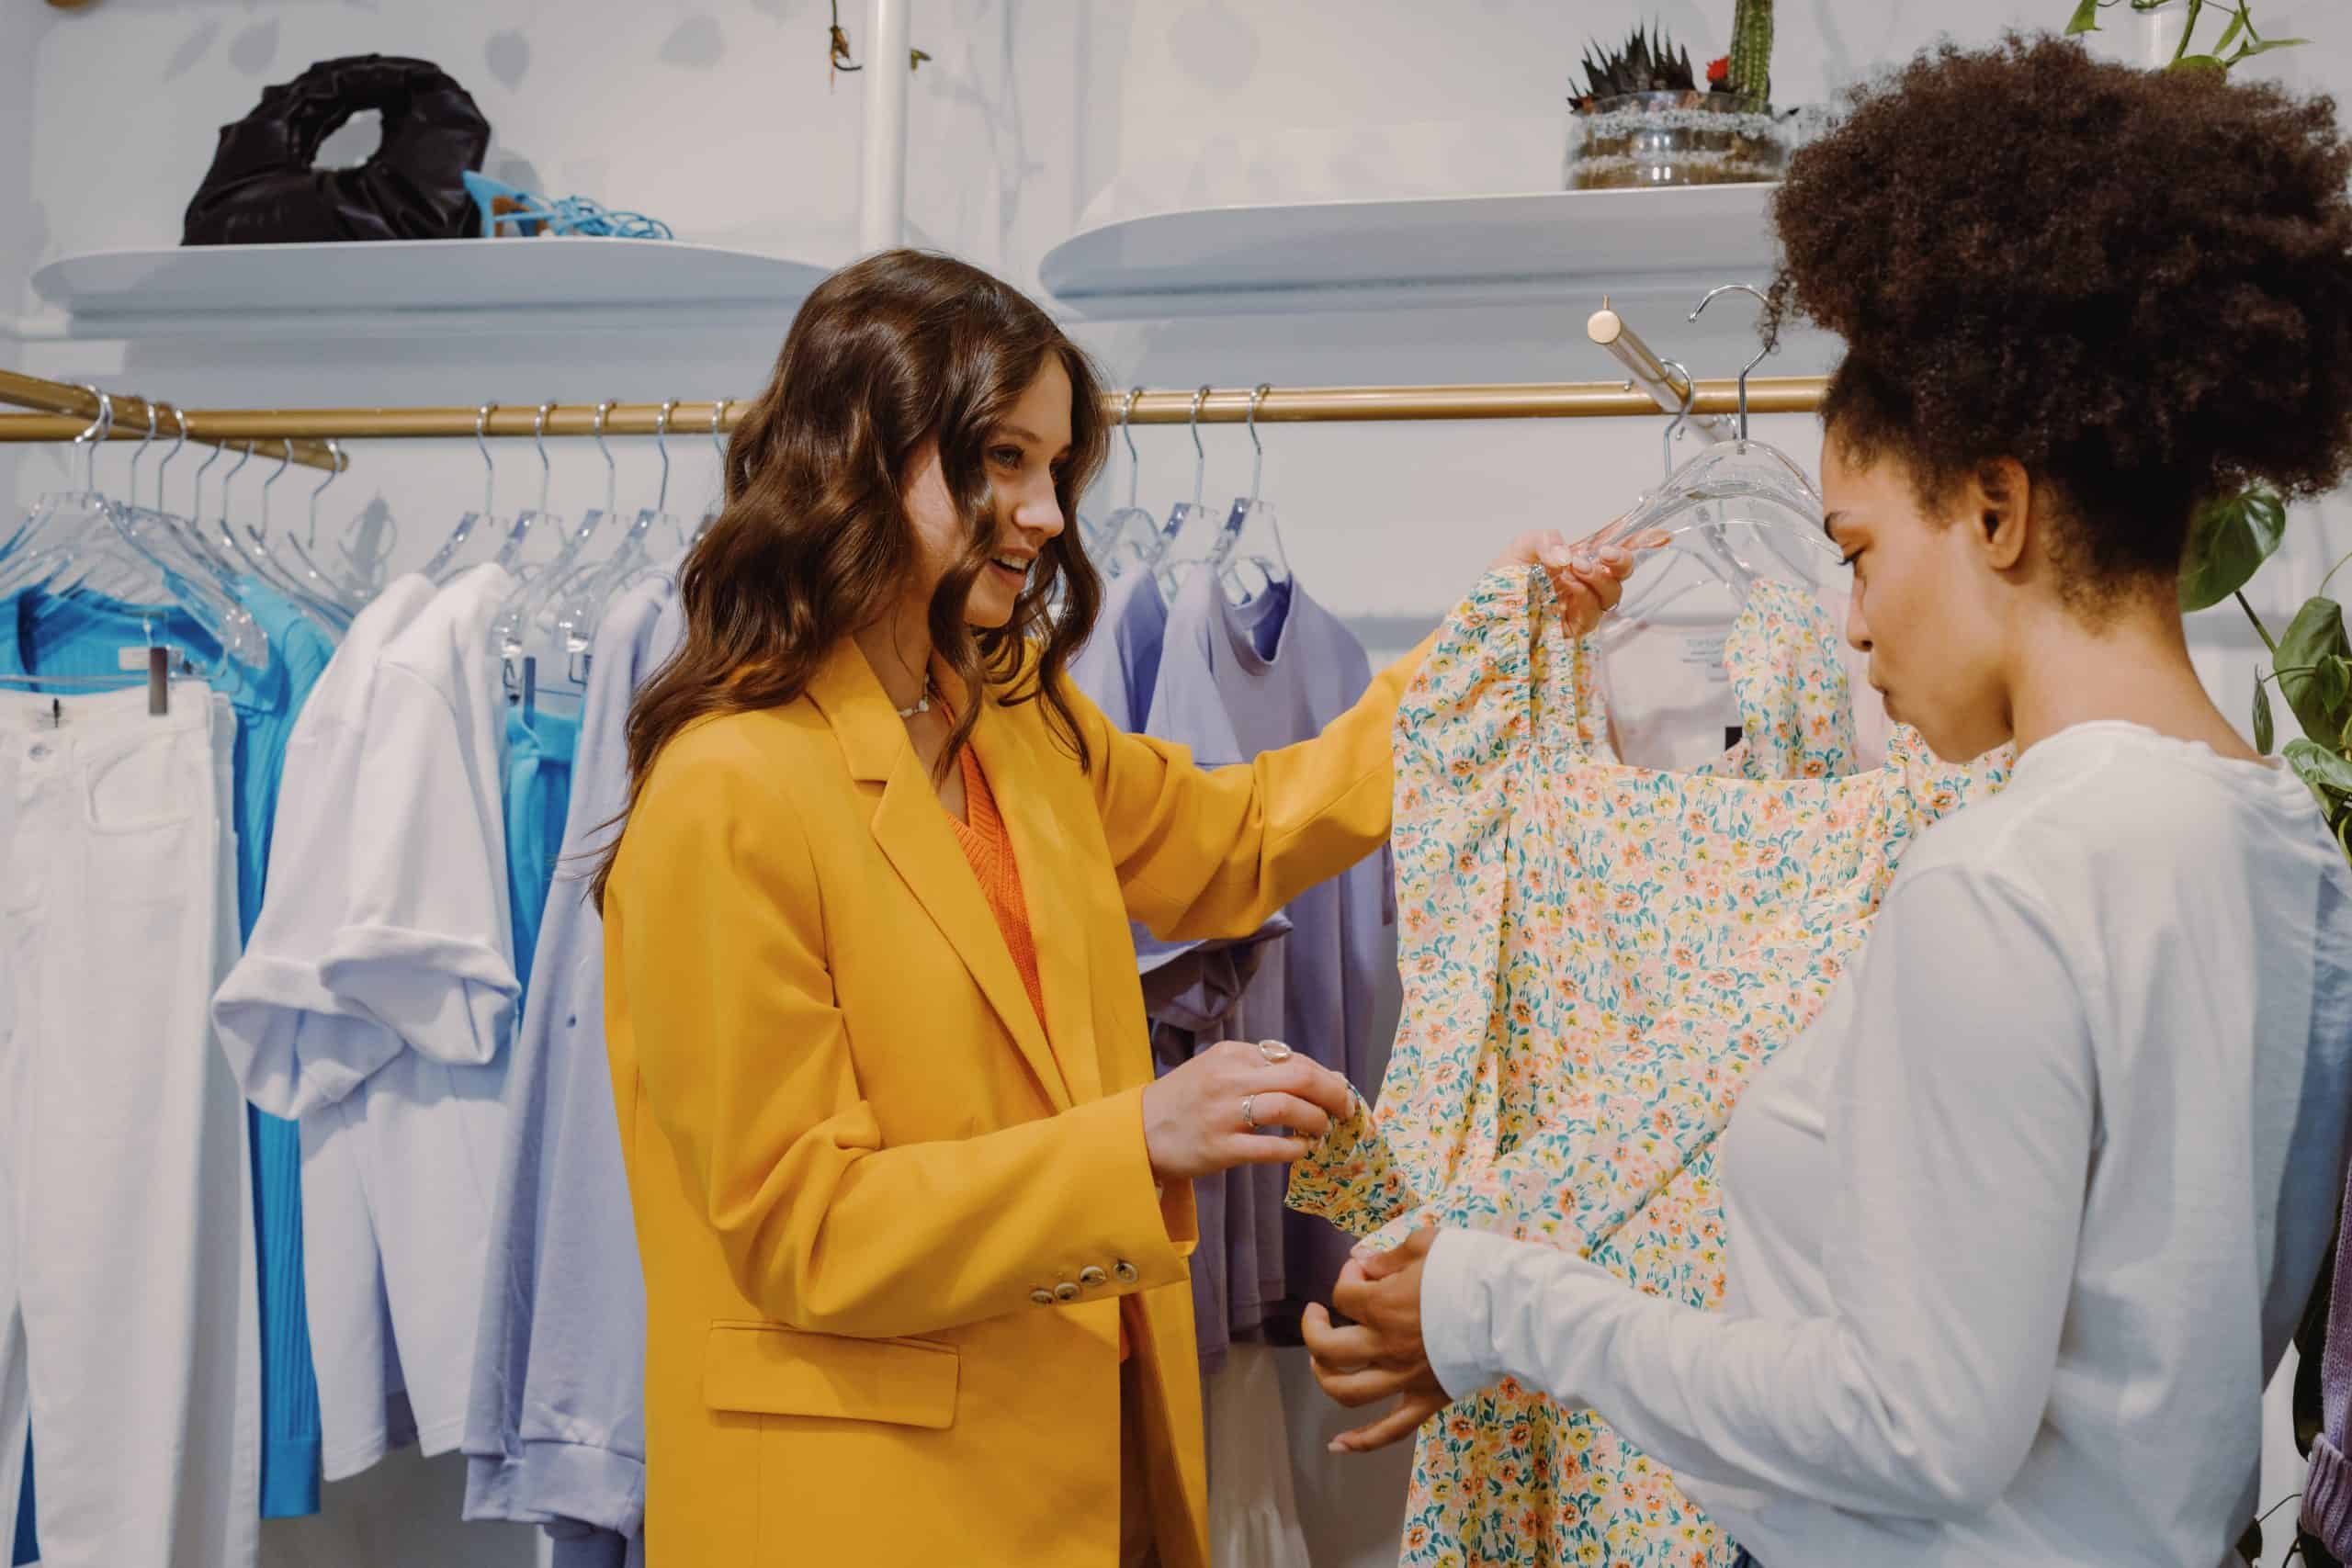 How to find the right personal stylist for you